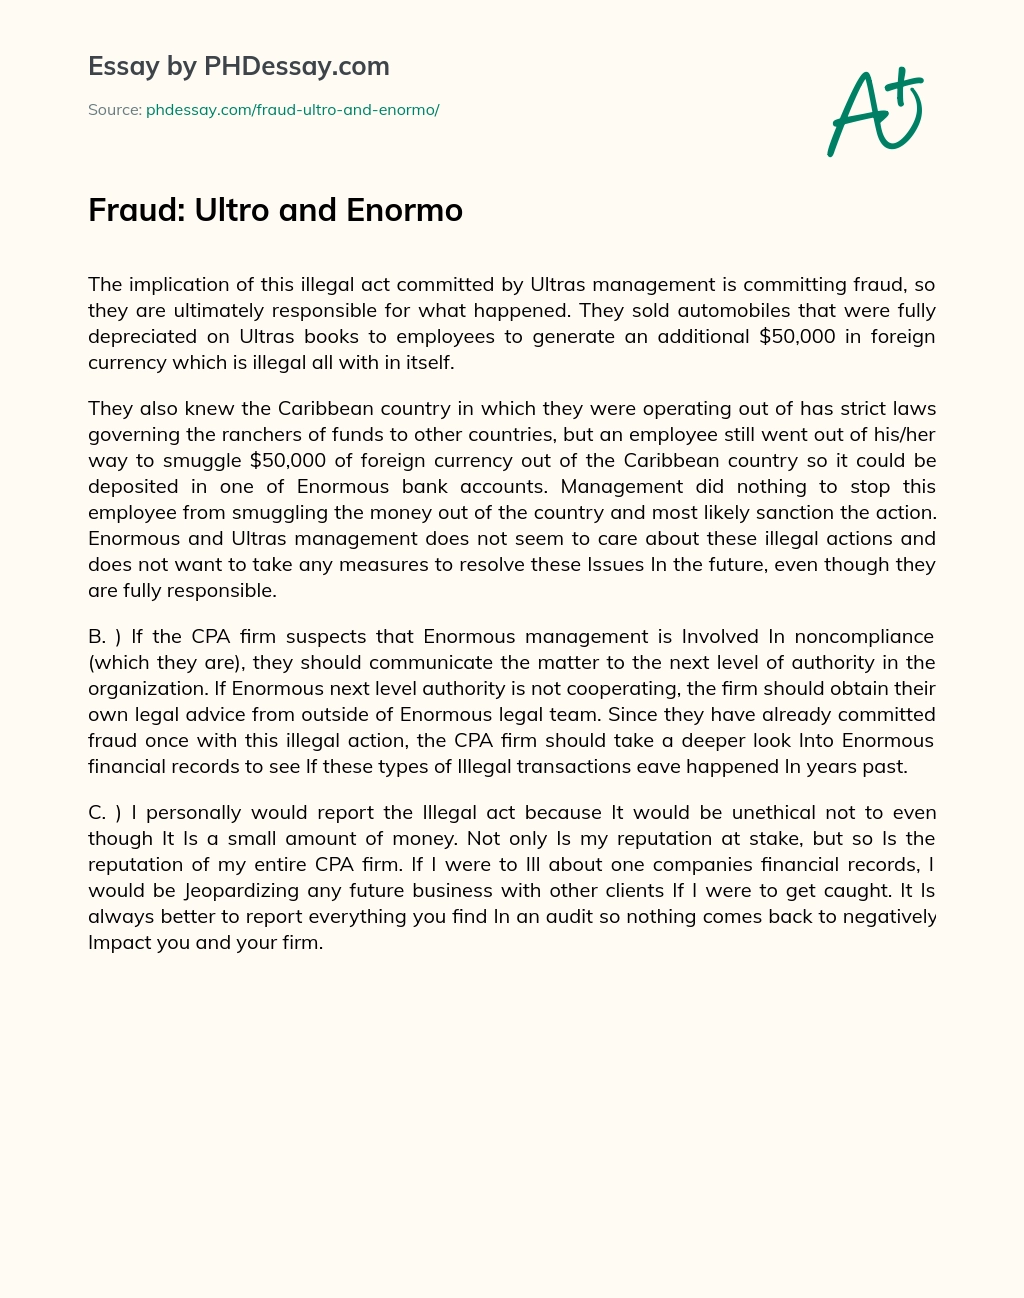 Fraud: Ultro and Enormo essay